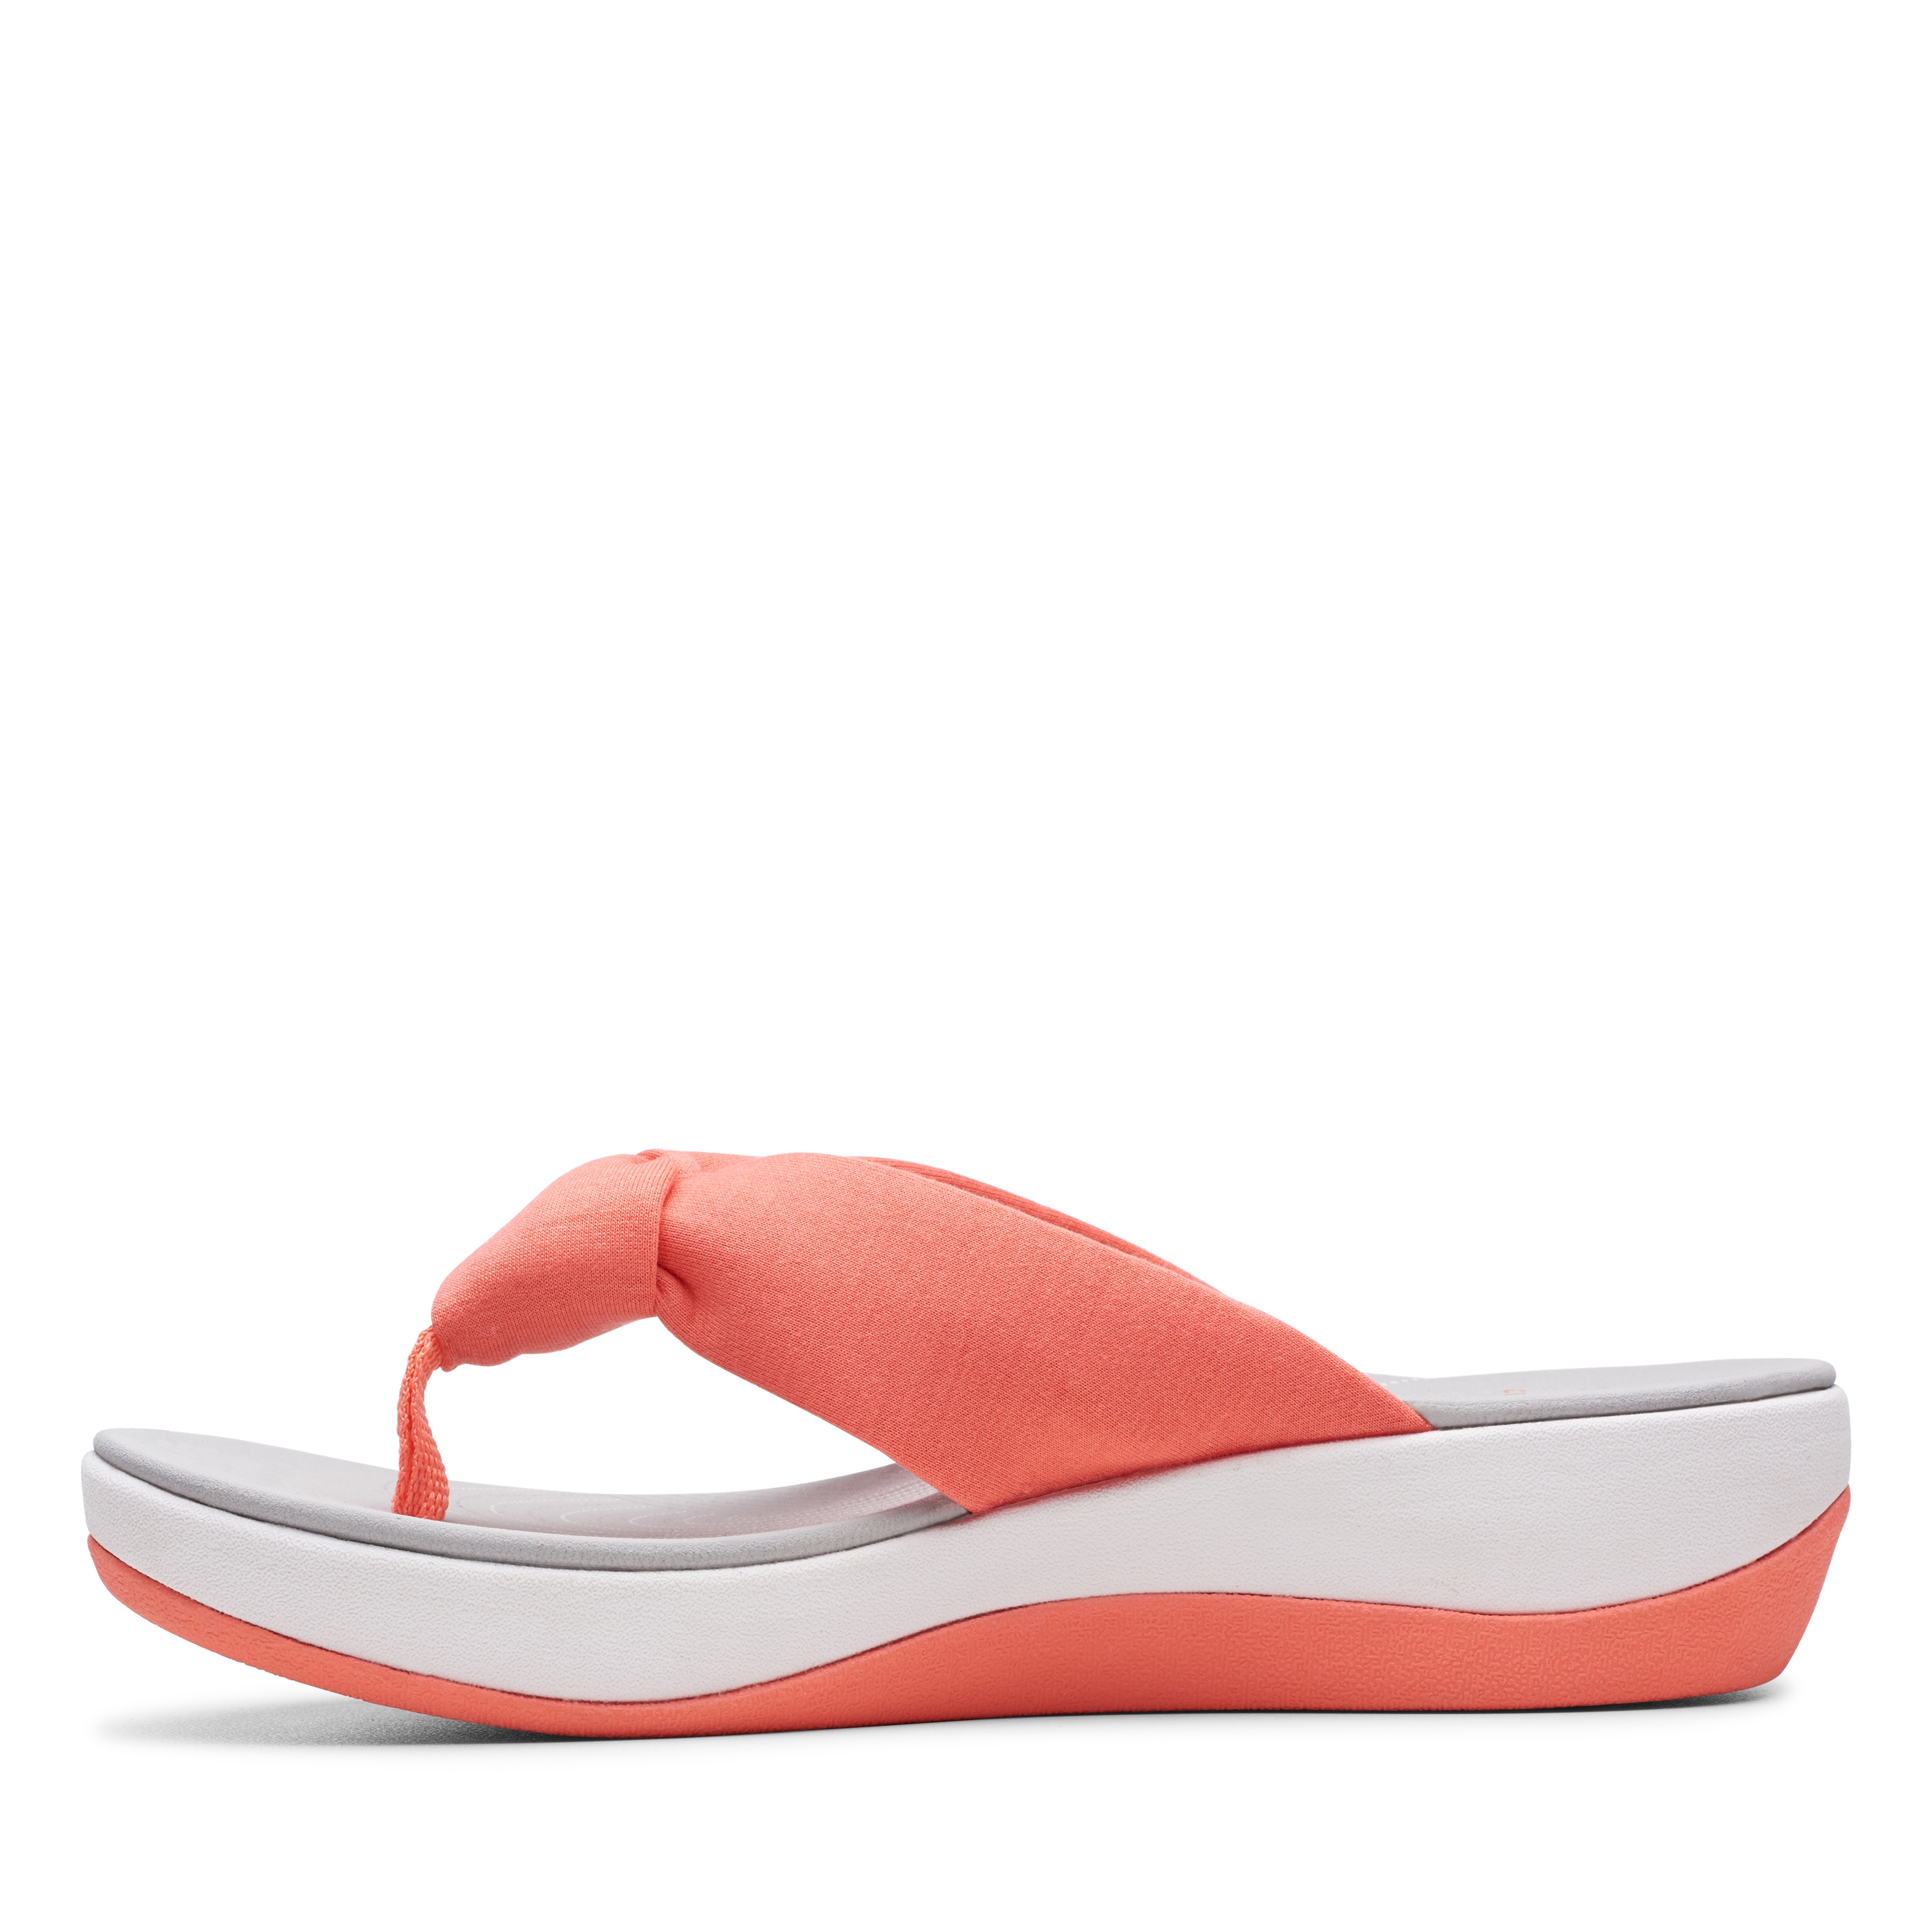 Clarks | Women's Red Synthetic Sandals 4